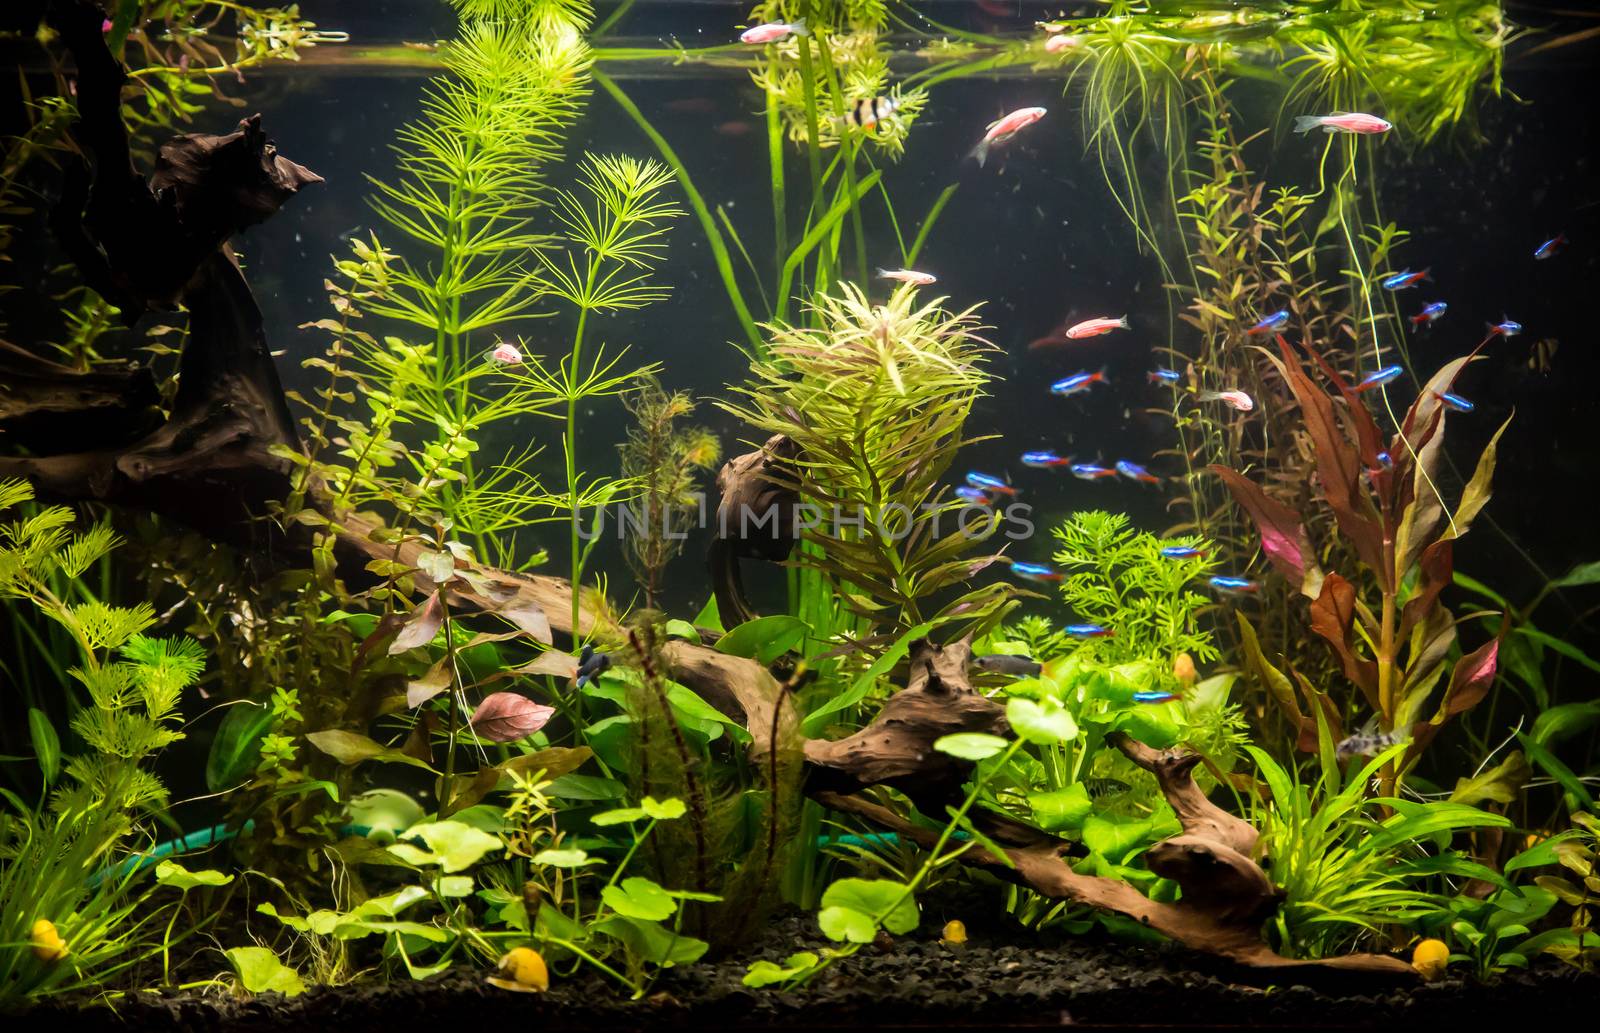 Ttropical freshwater aquarium with fishes by bloodua